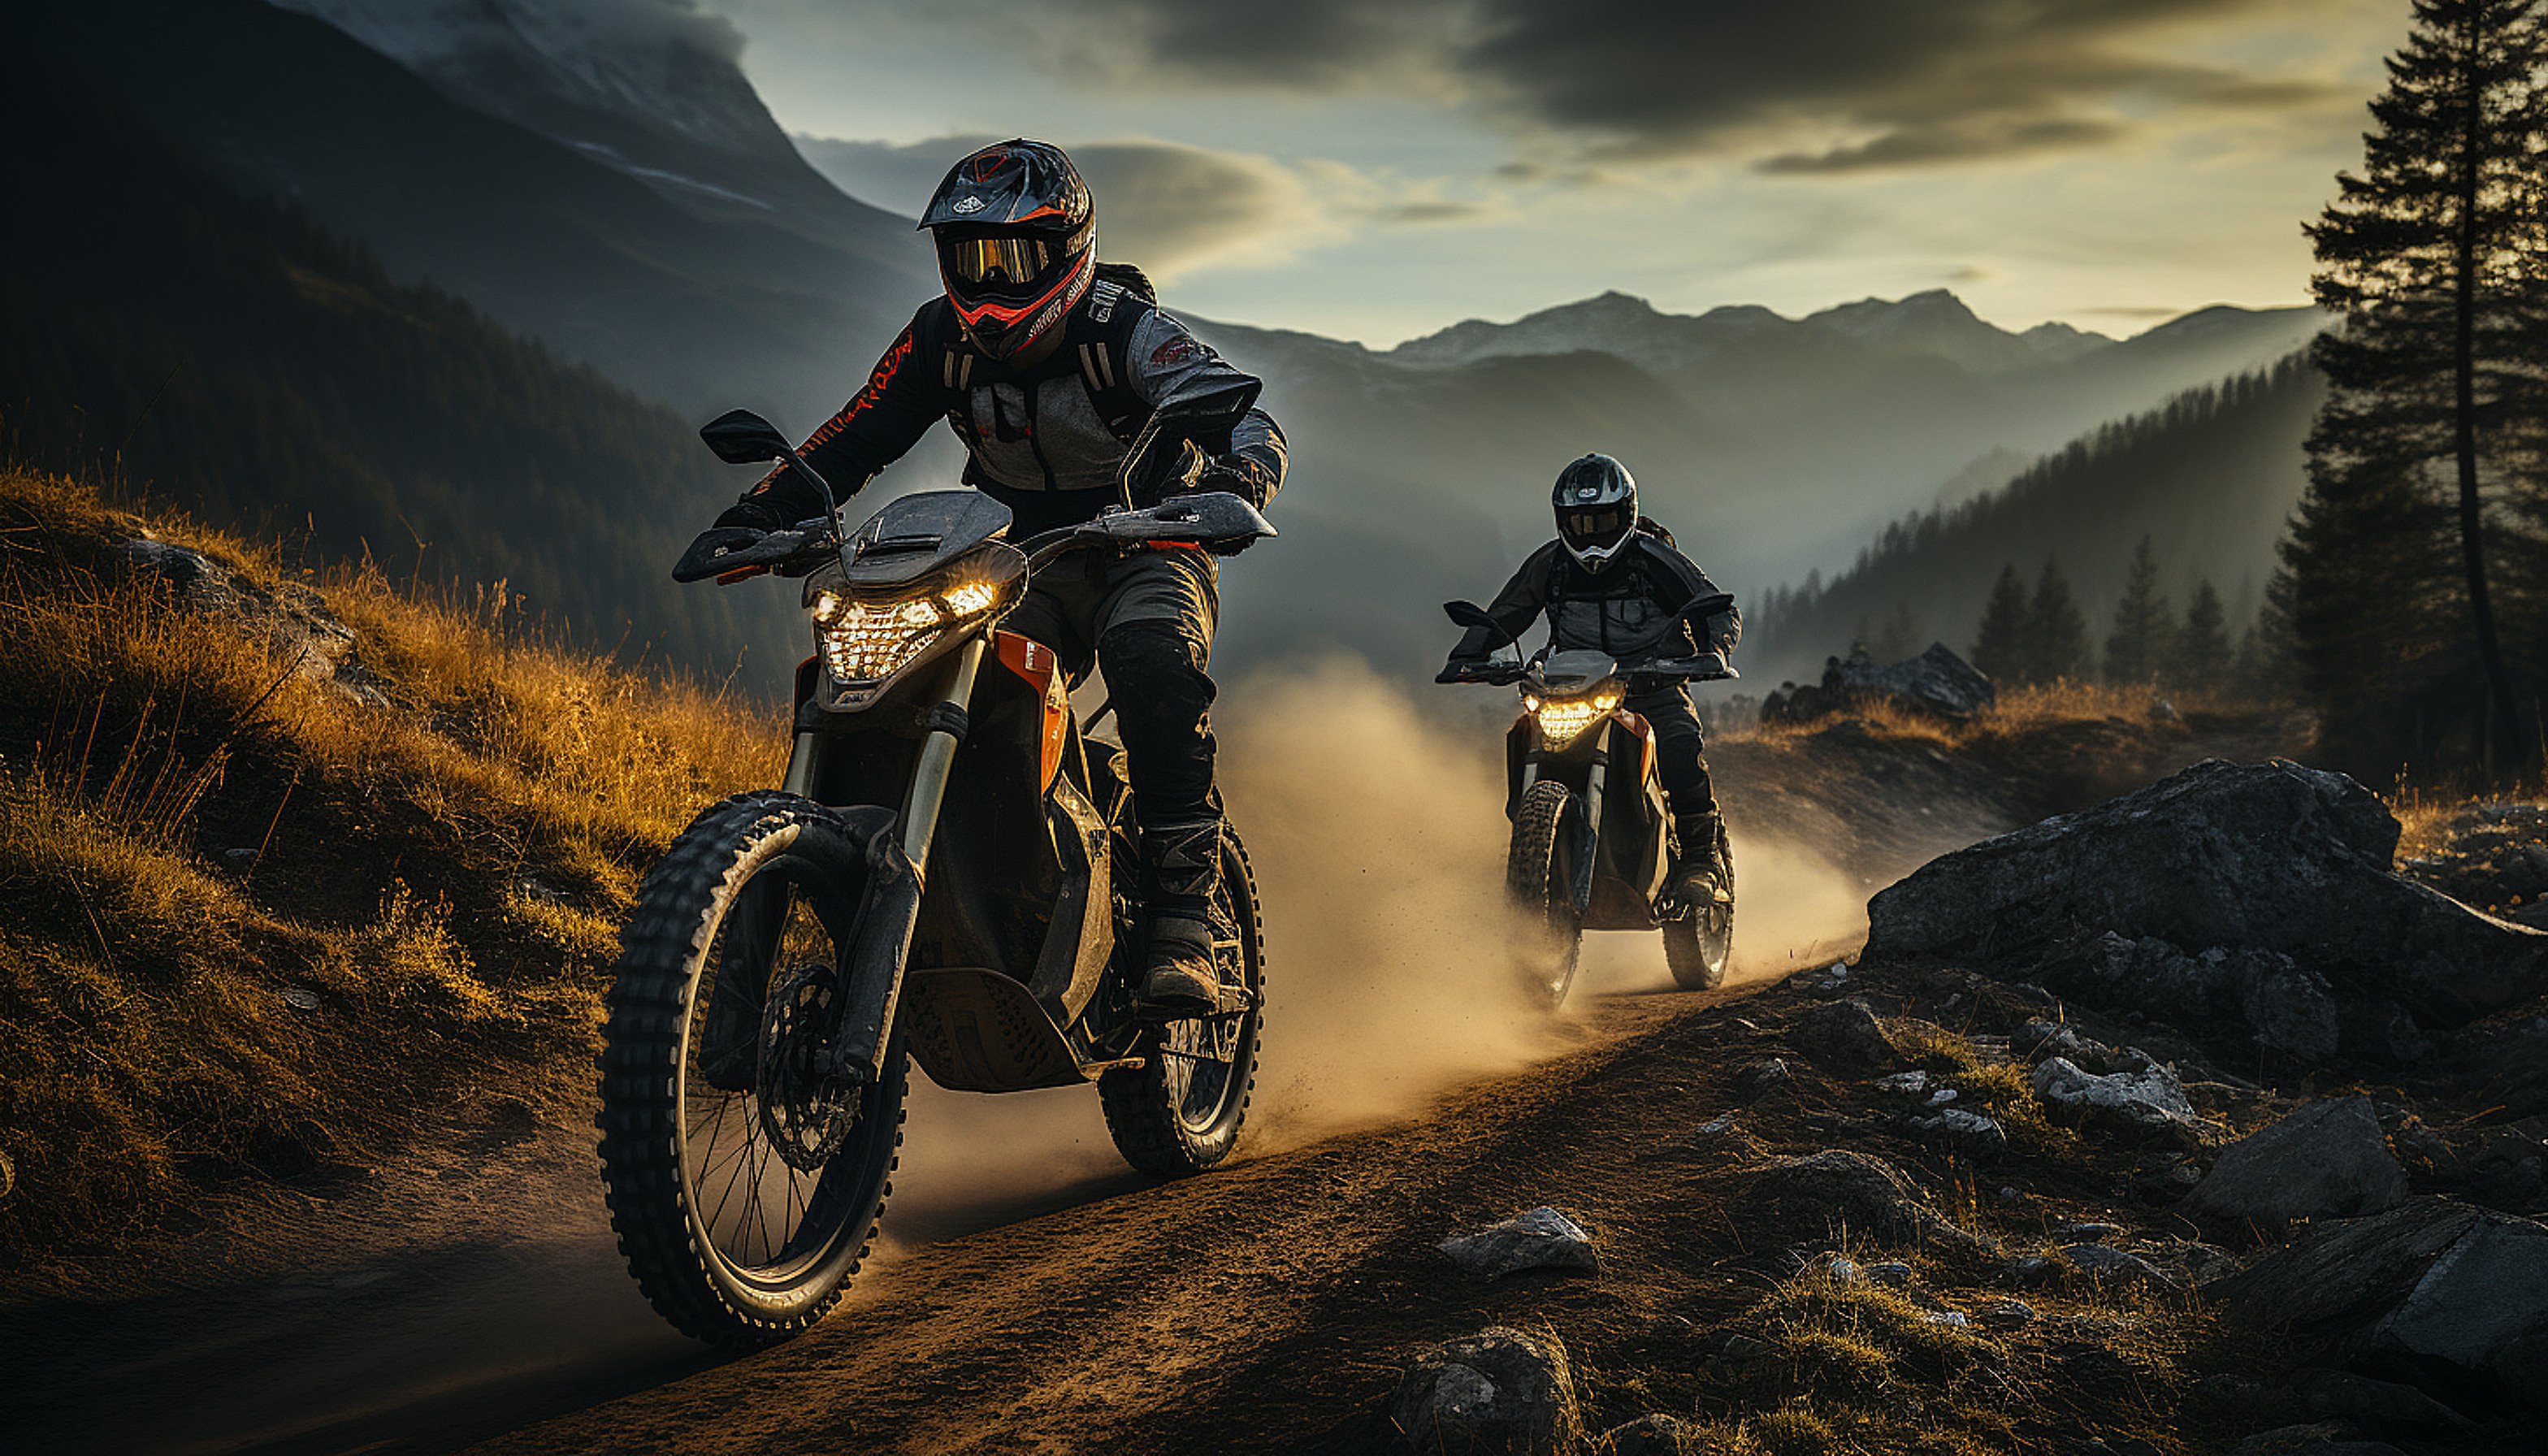 Two electric motorcycle riders hitting the dirt road